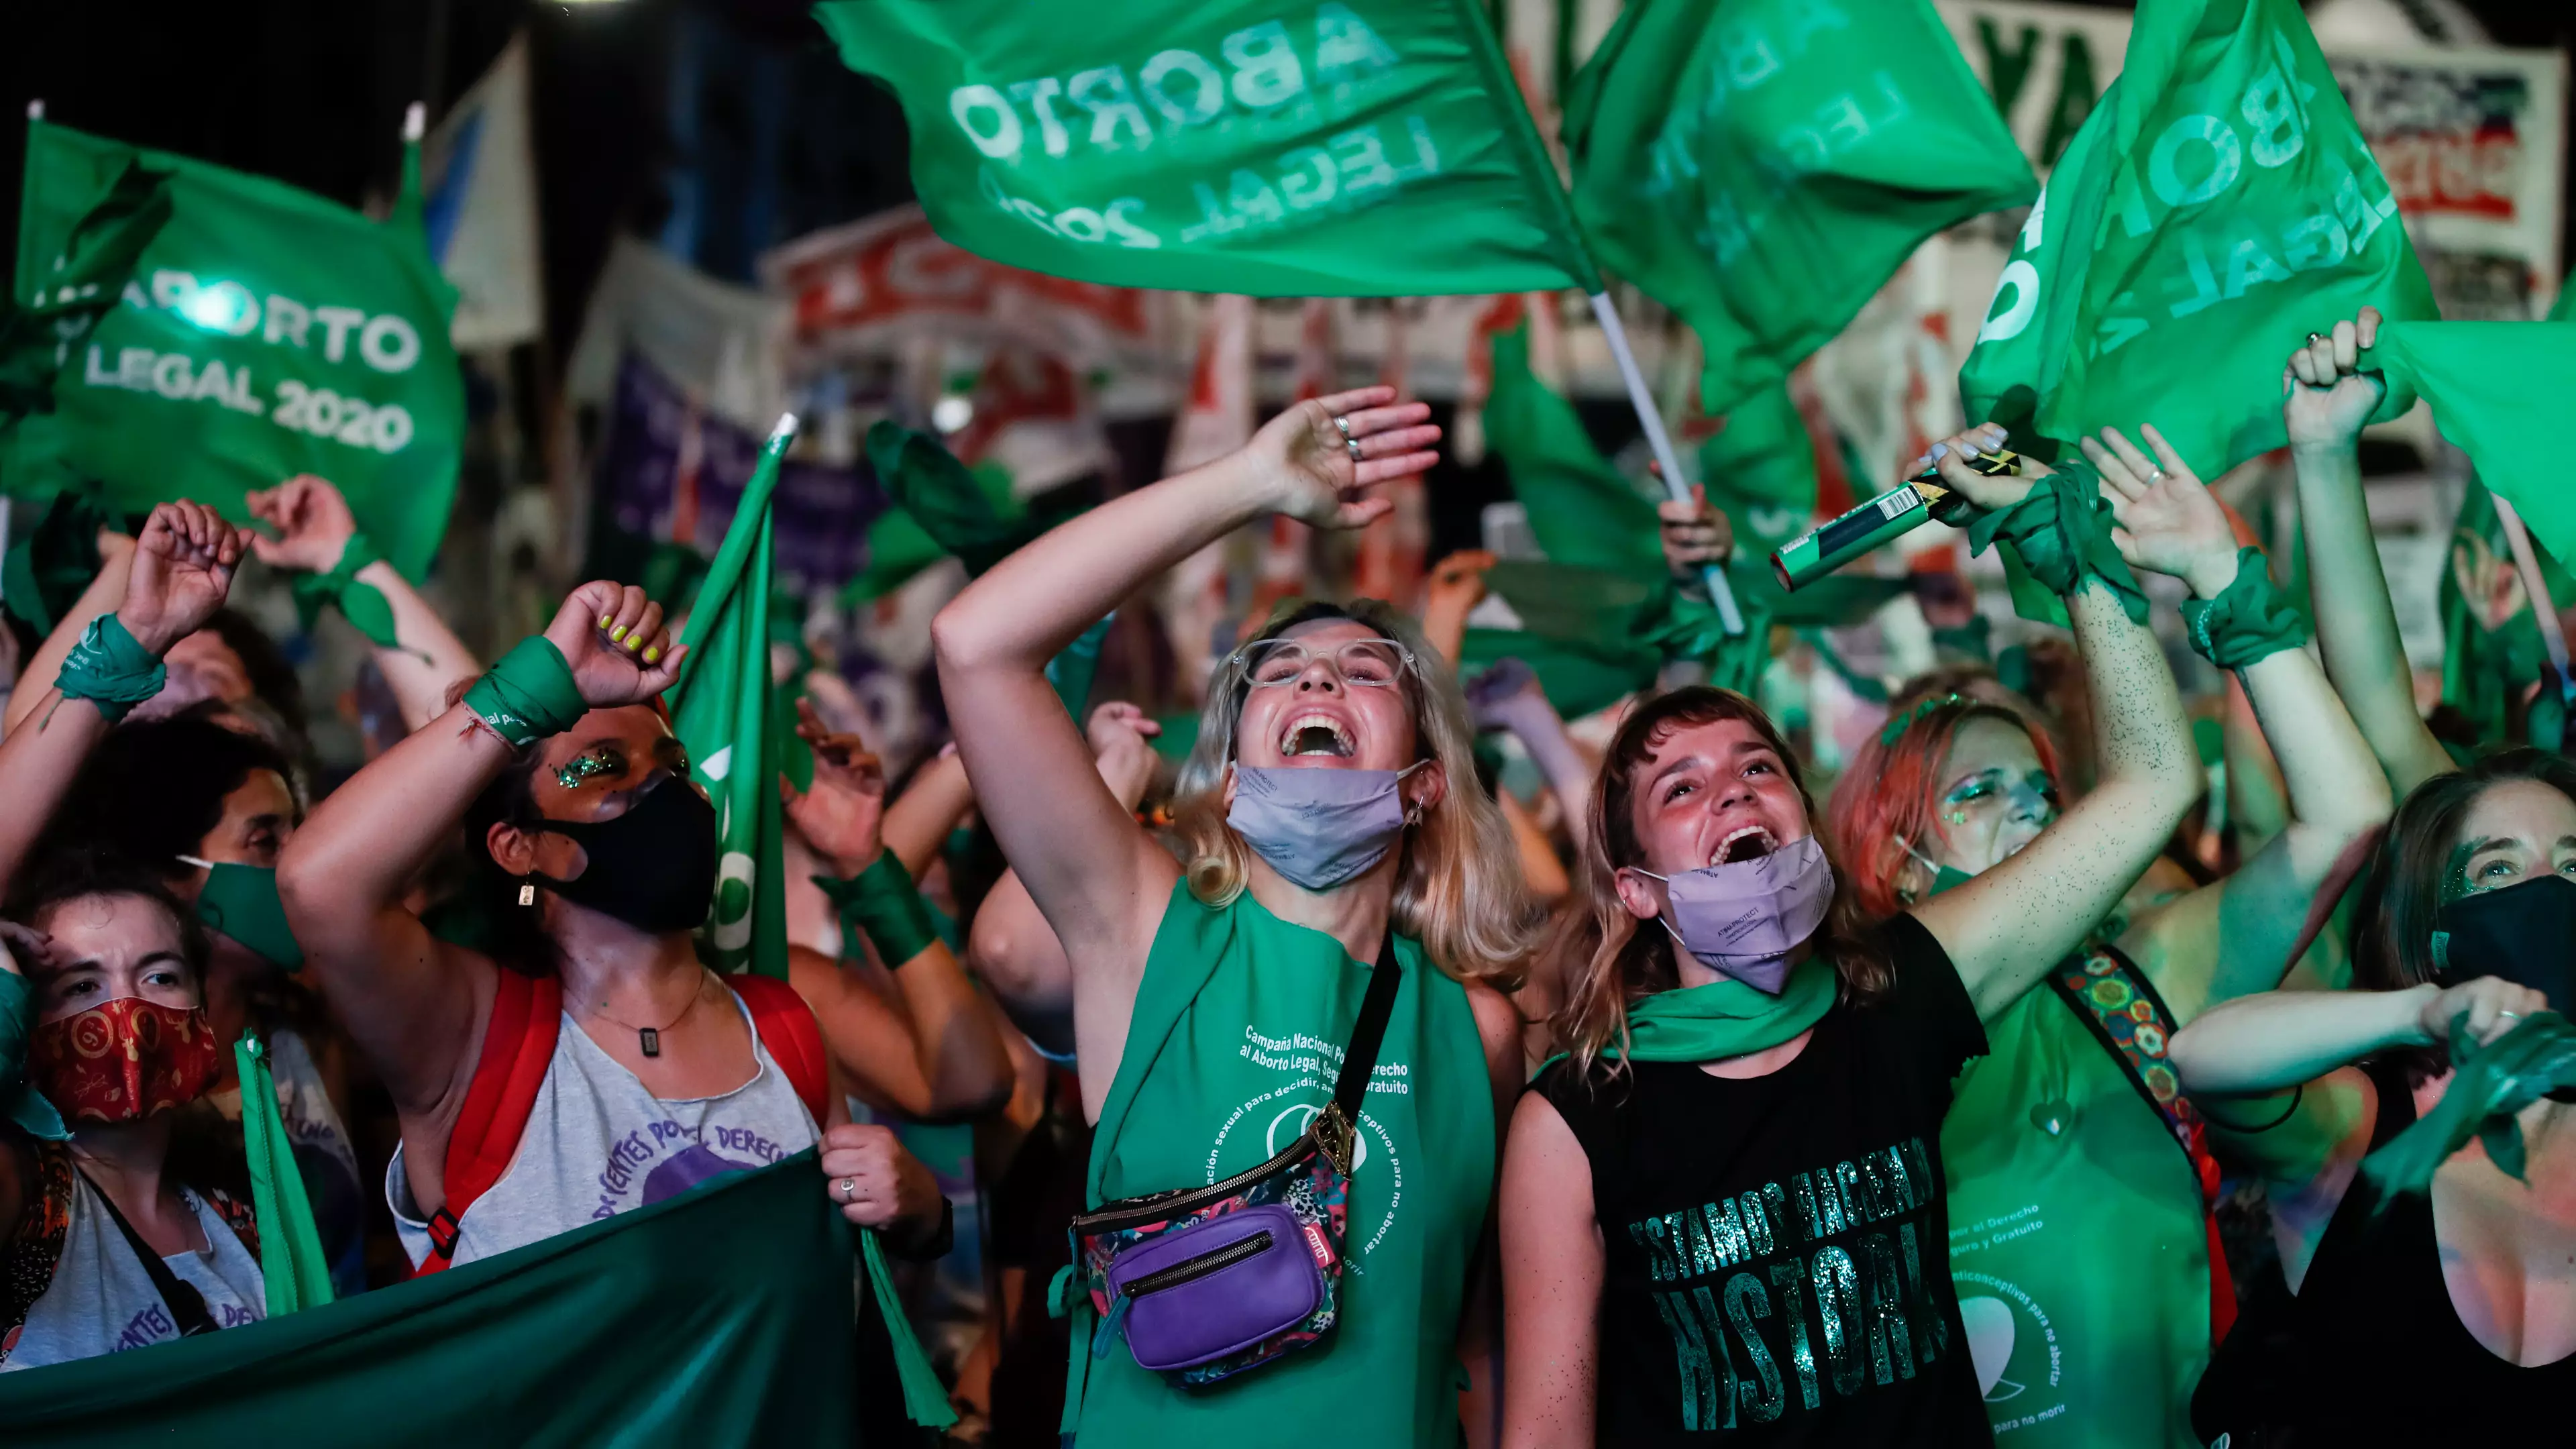 Argentina Becomes The First Major Country In Latin America To Legalise Abortion